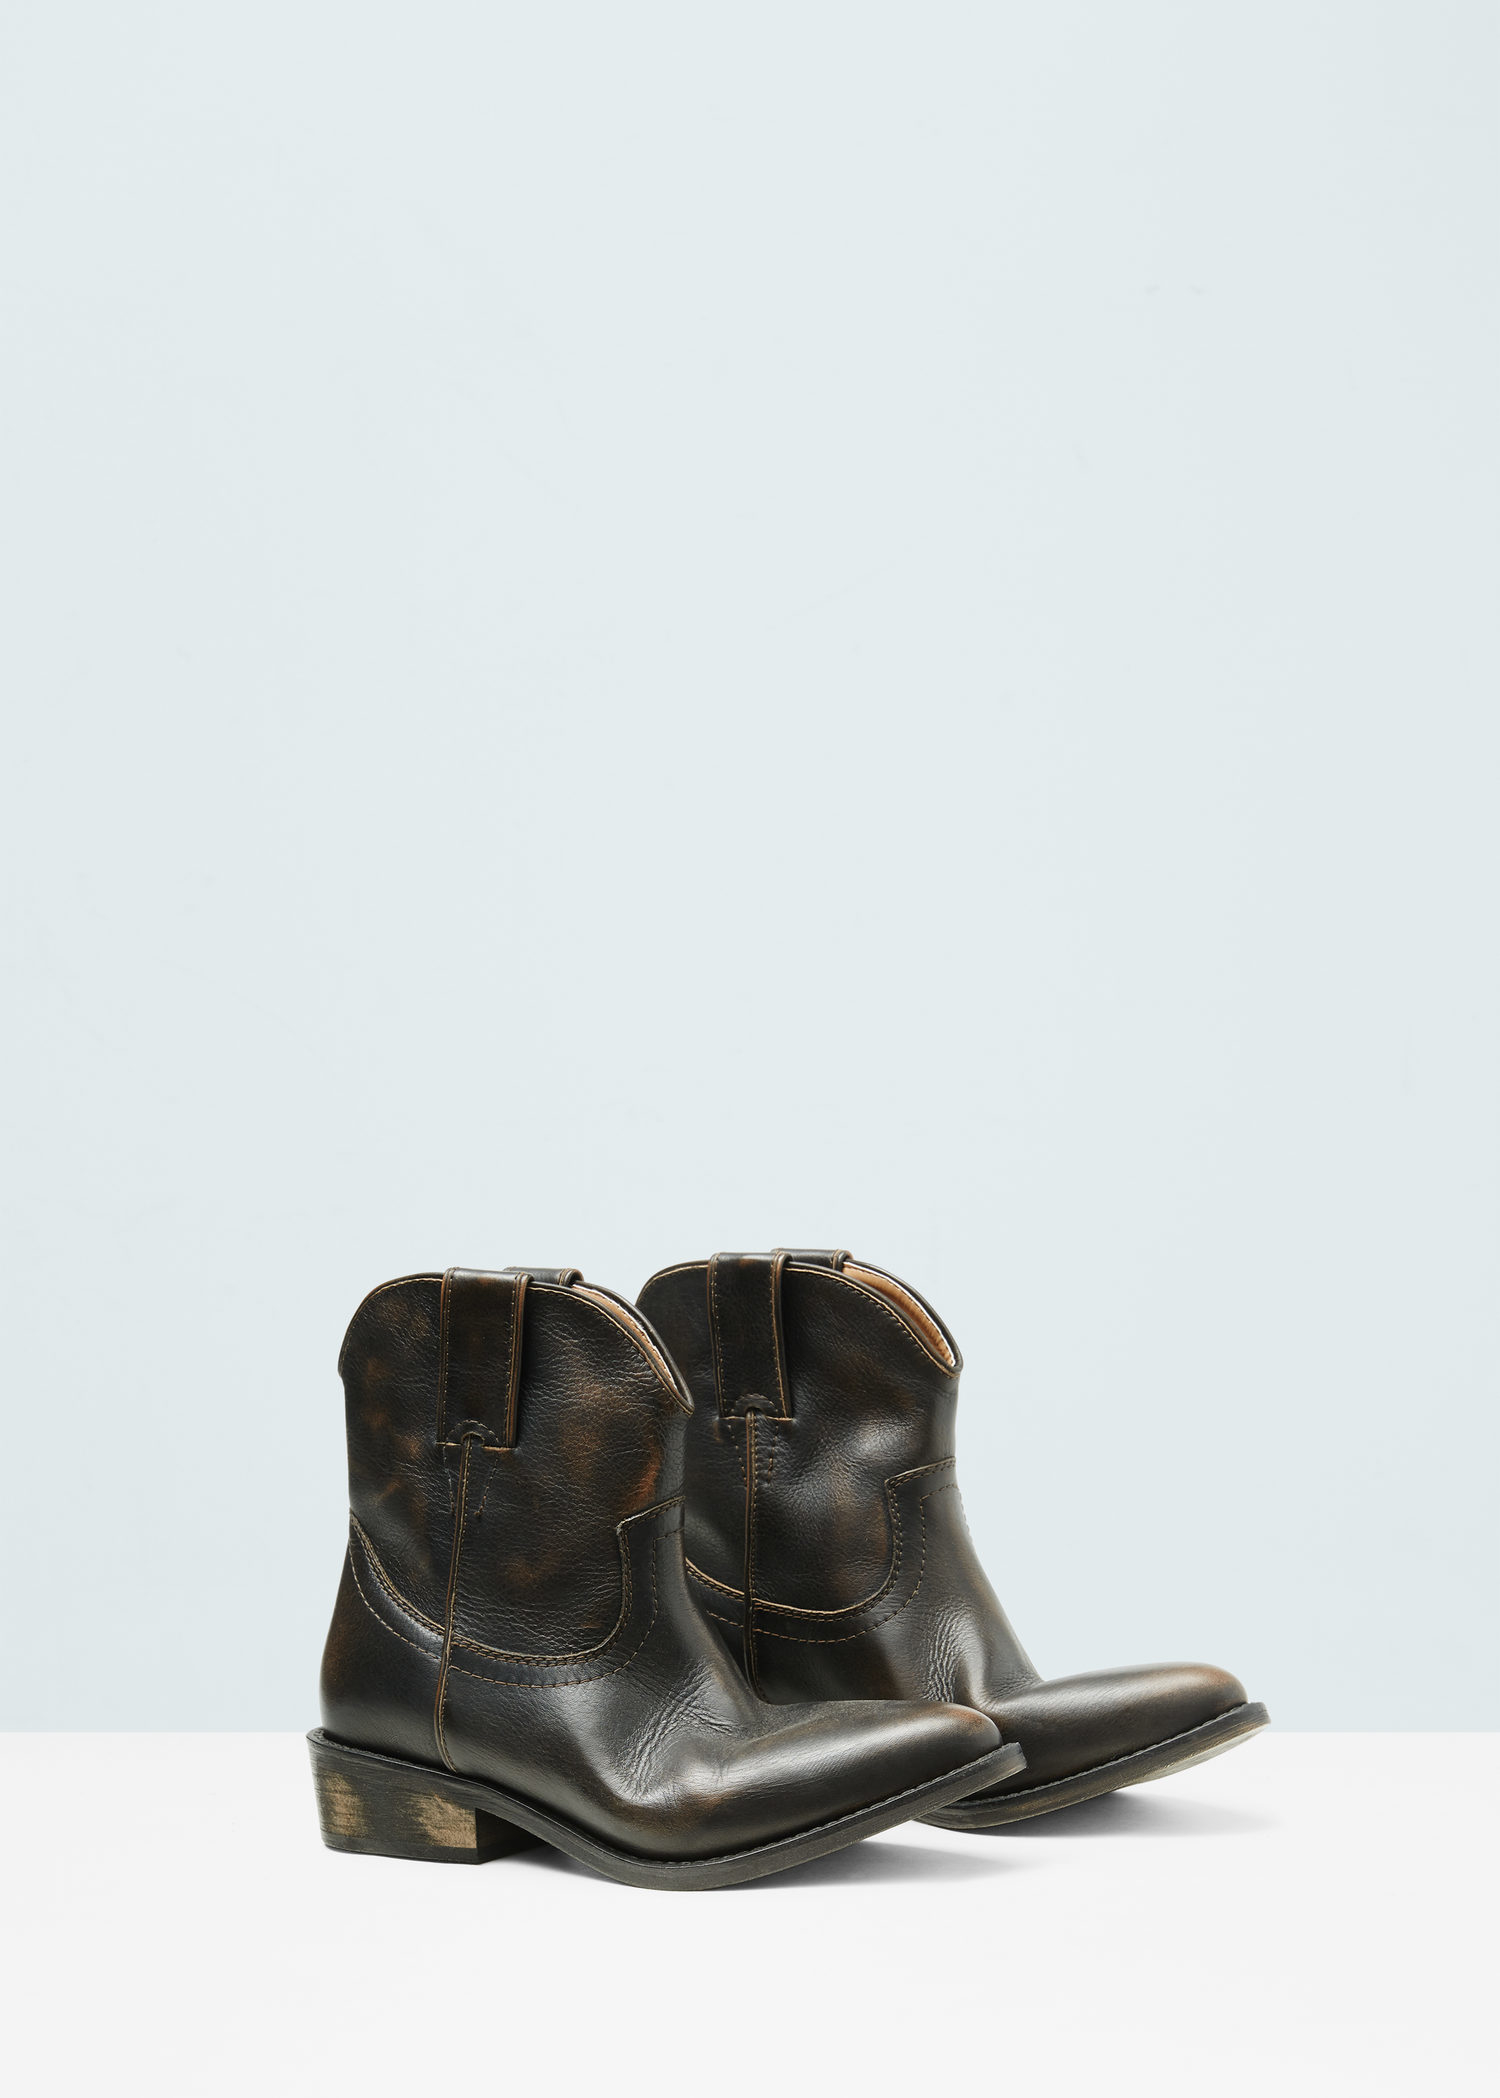 Mango Leather Cowboy Ankle Boots in Brown | Lyst